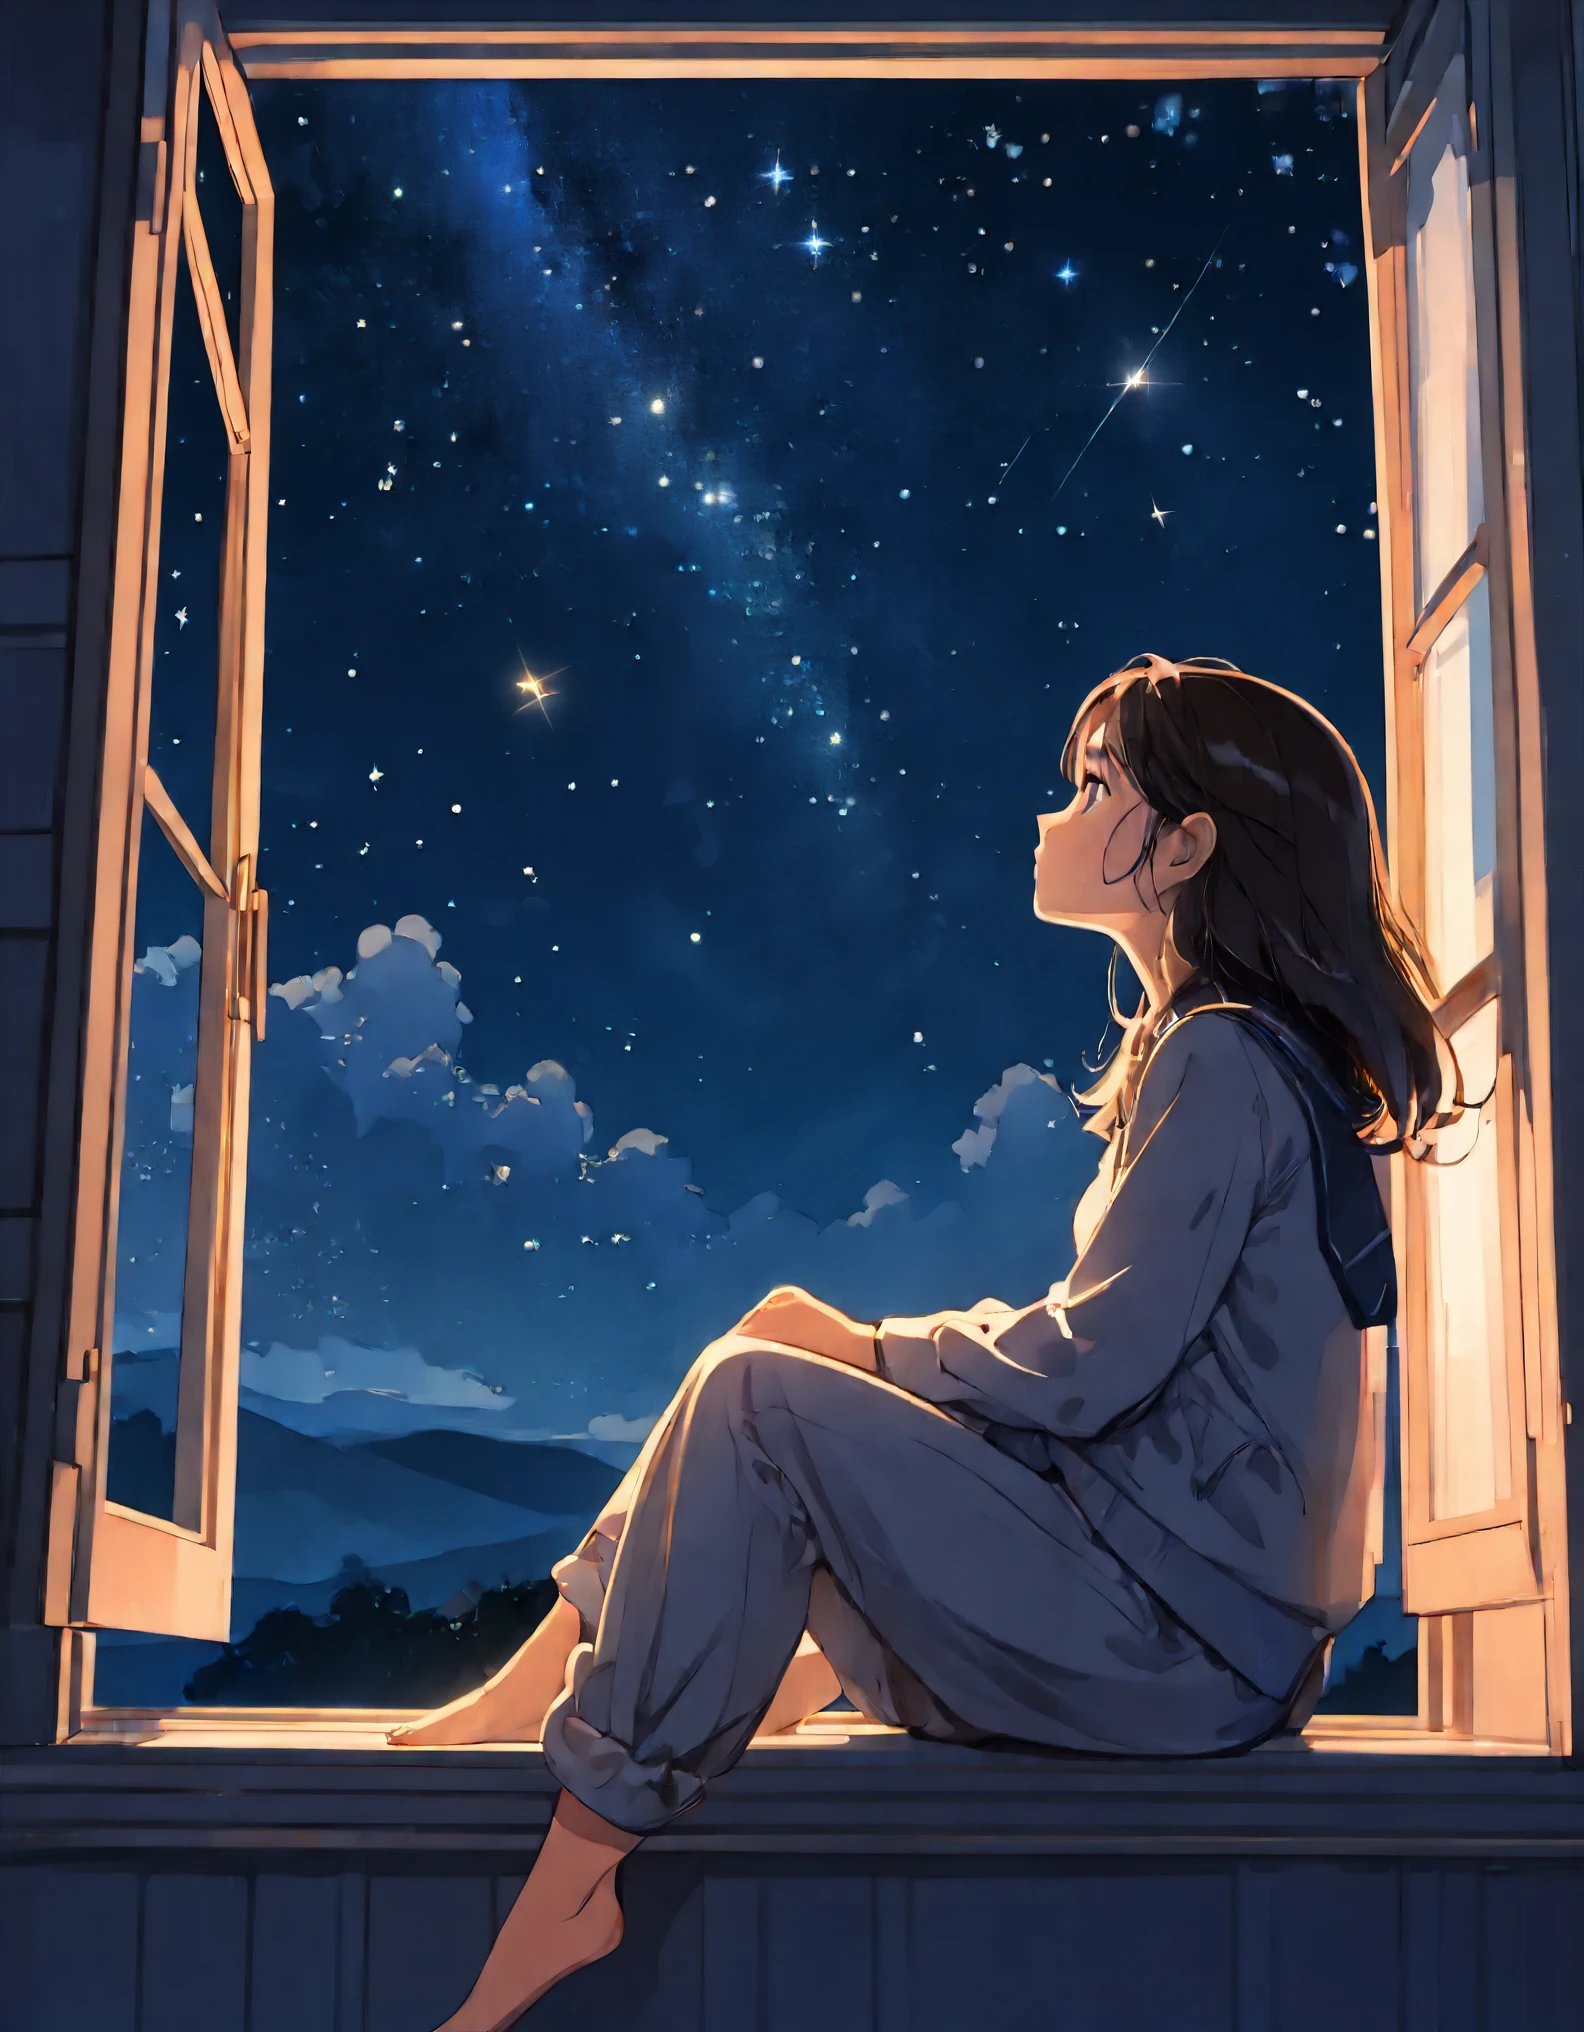 A girl, sitting by the window on a quiet night ((Looking at the stars one by one: 1.5)) ((Looking up at the stars outside the window: 1.5)), with a sad face